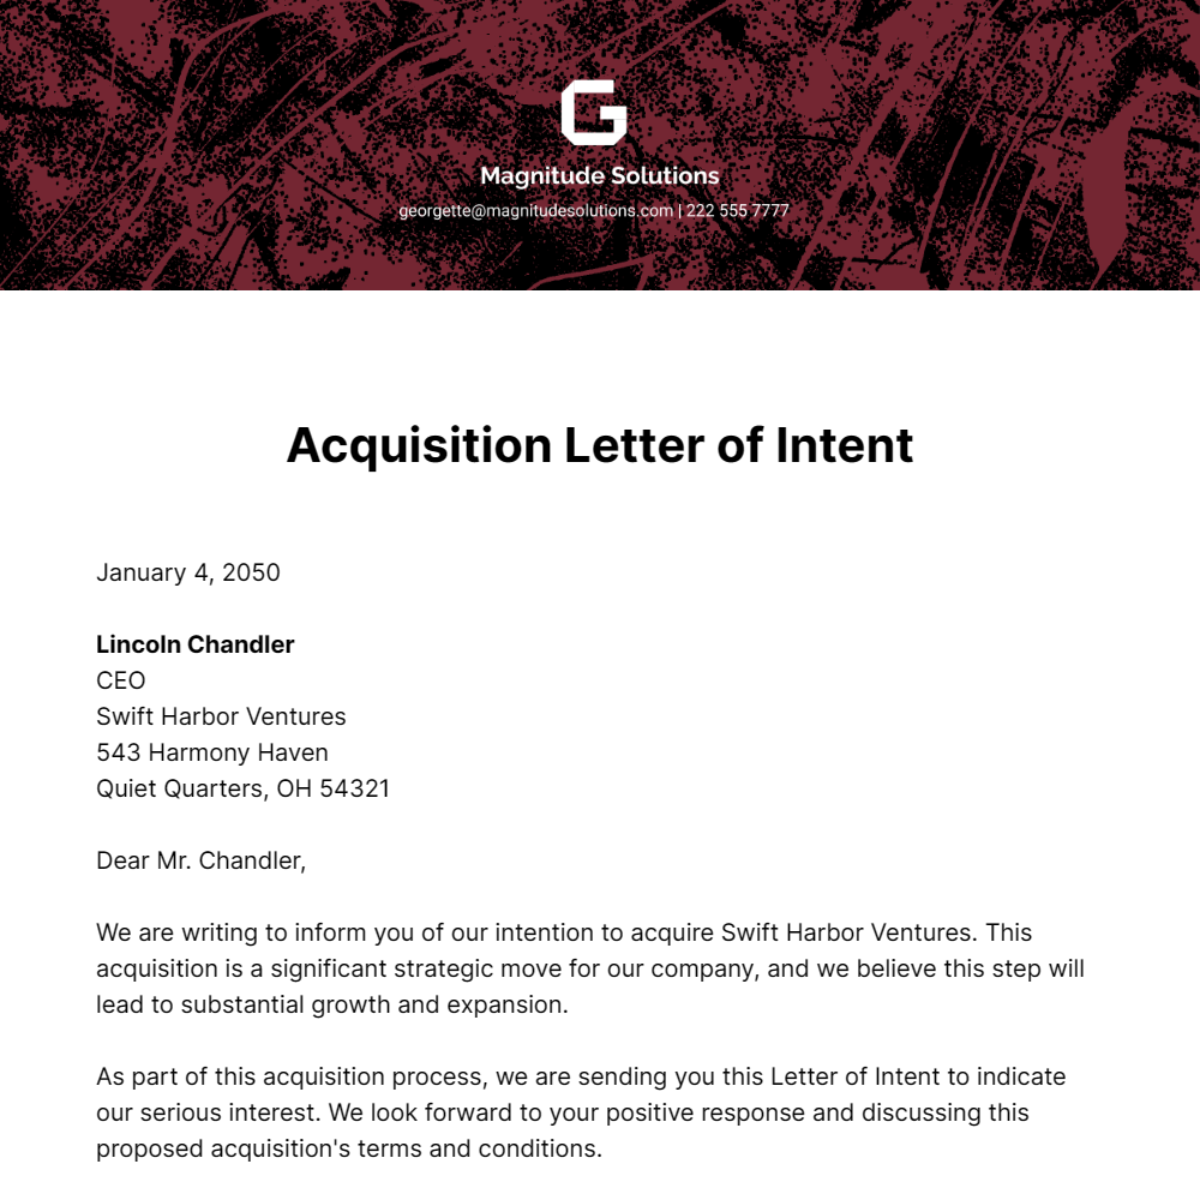 Acquisition Letter to Intent Template